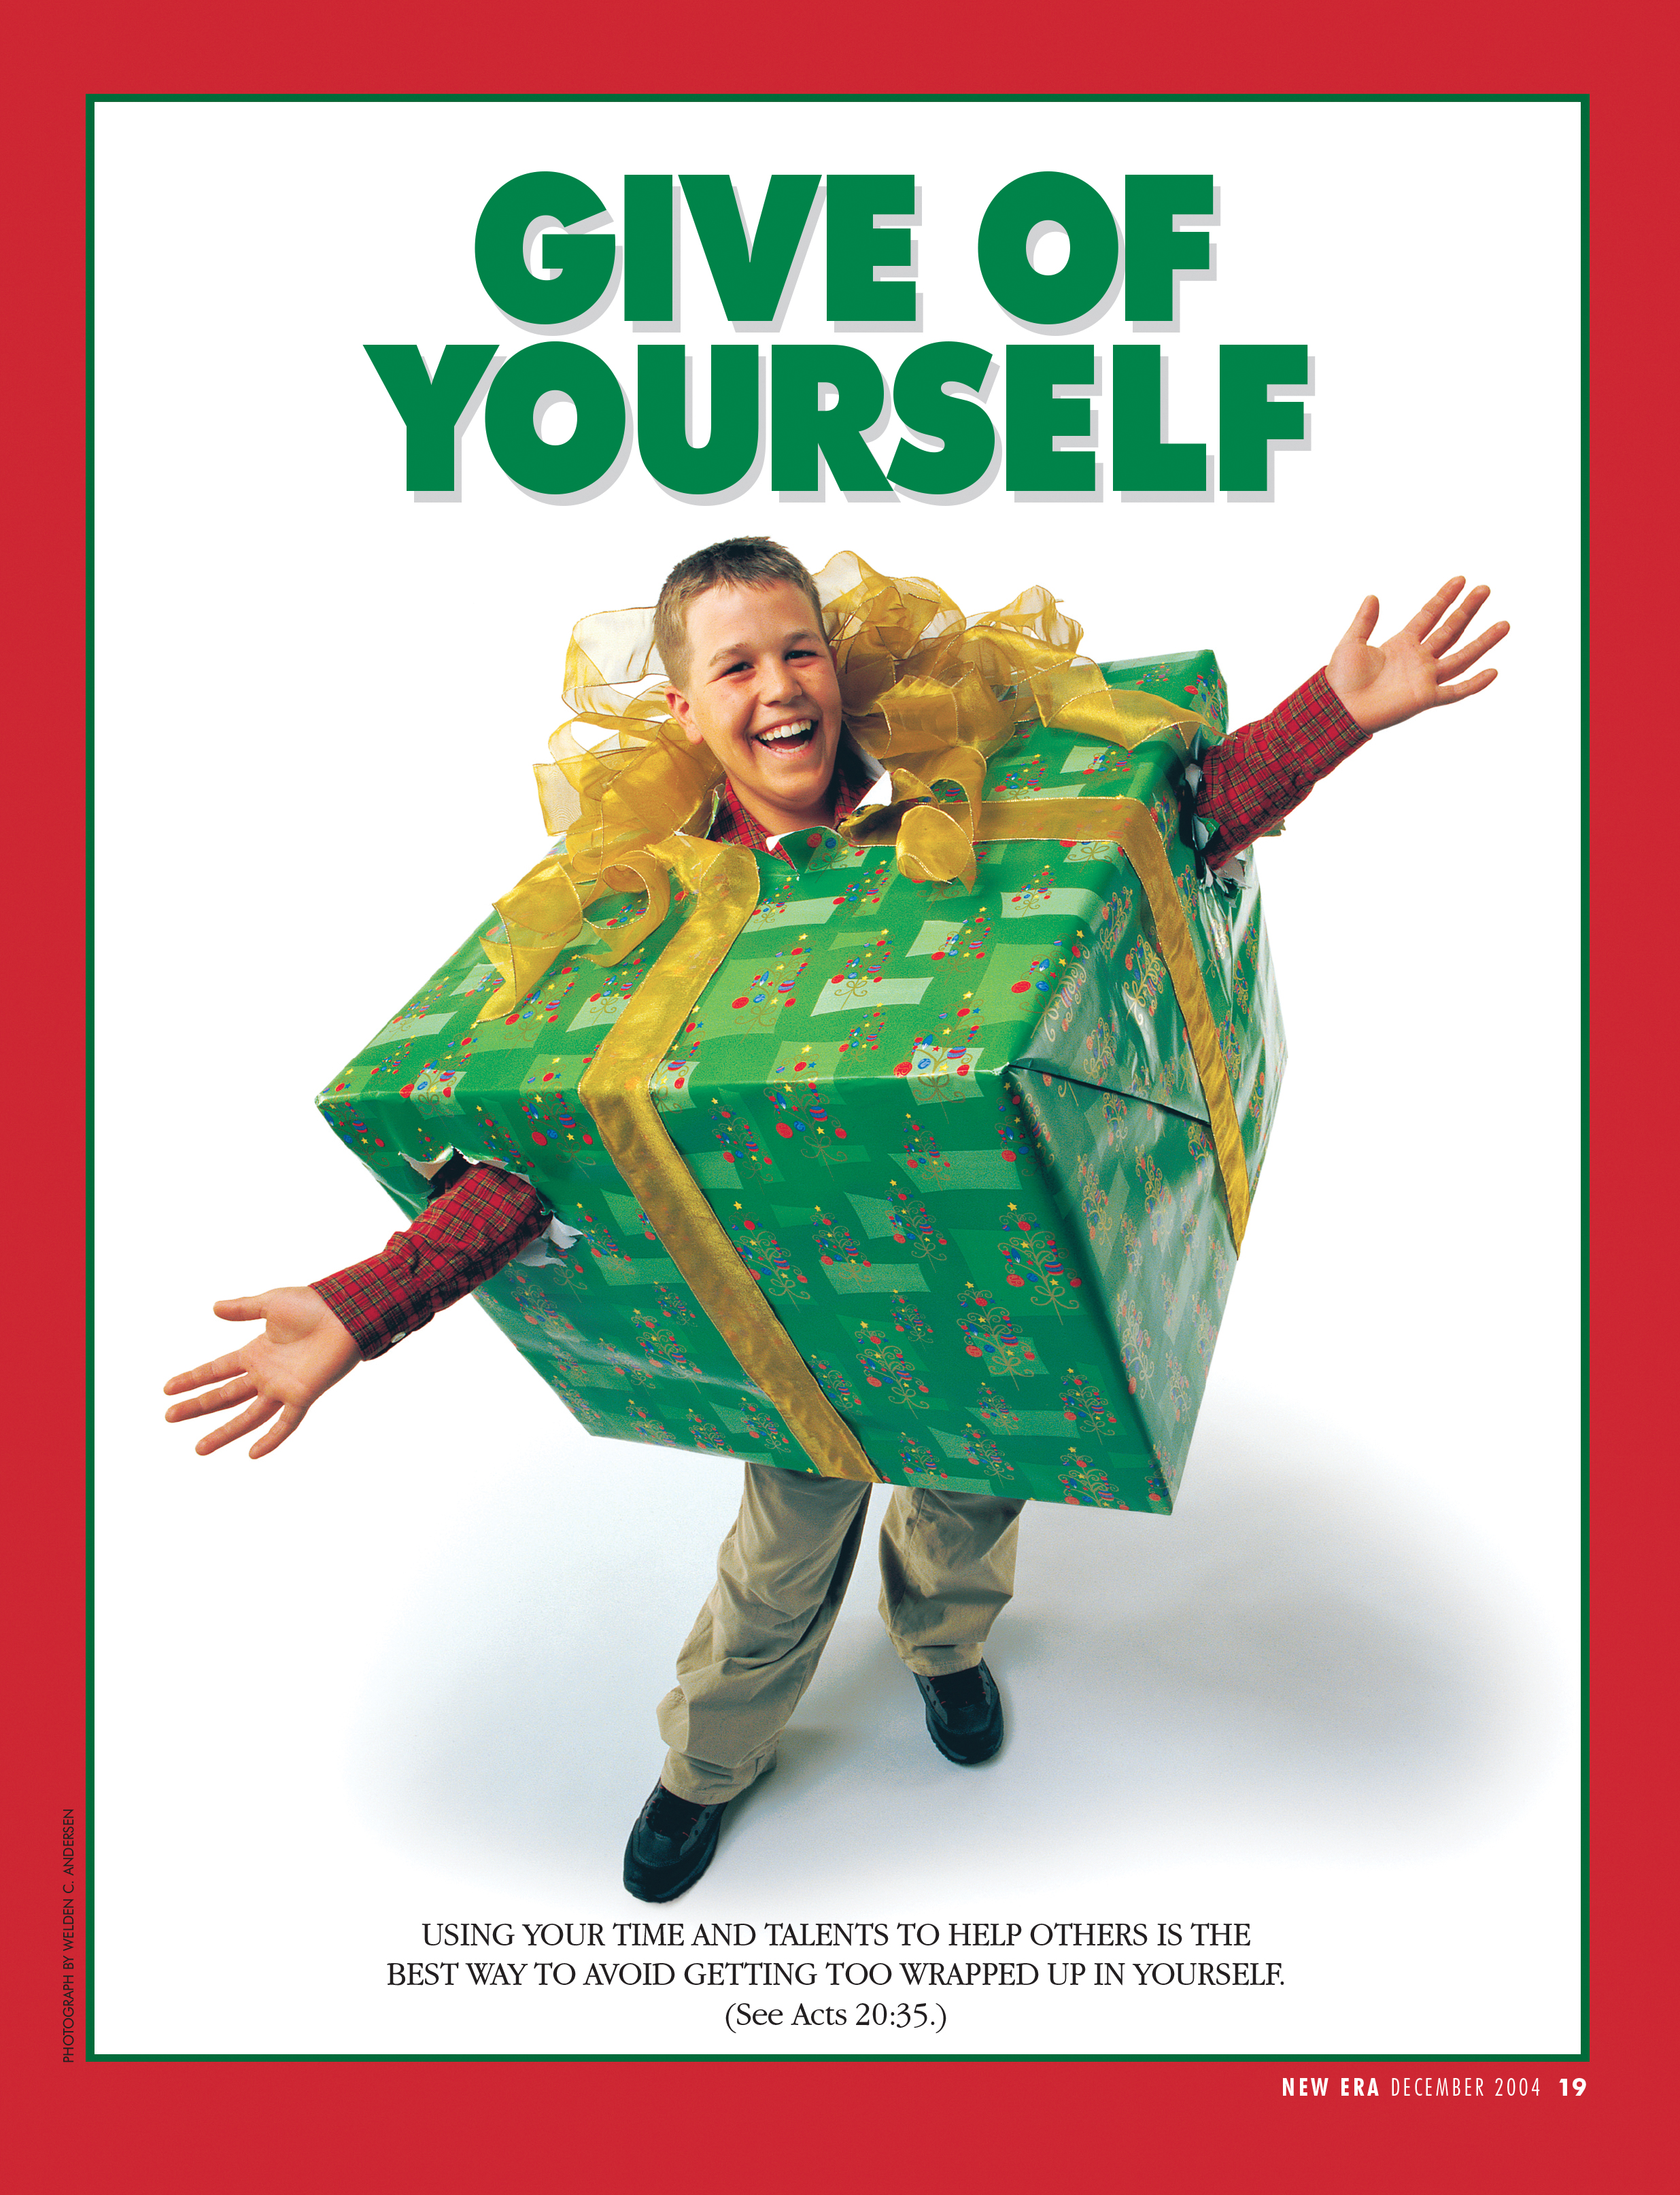 A conceptual photograph of a young man inside of a large, wrapped Christmas gift, paired with the words “Give of Yourself.”